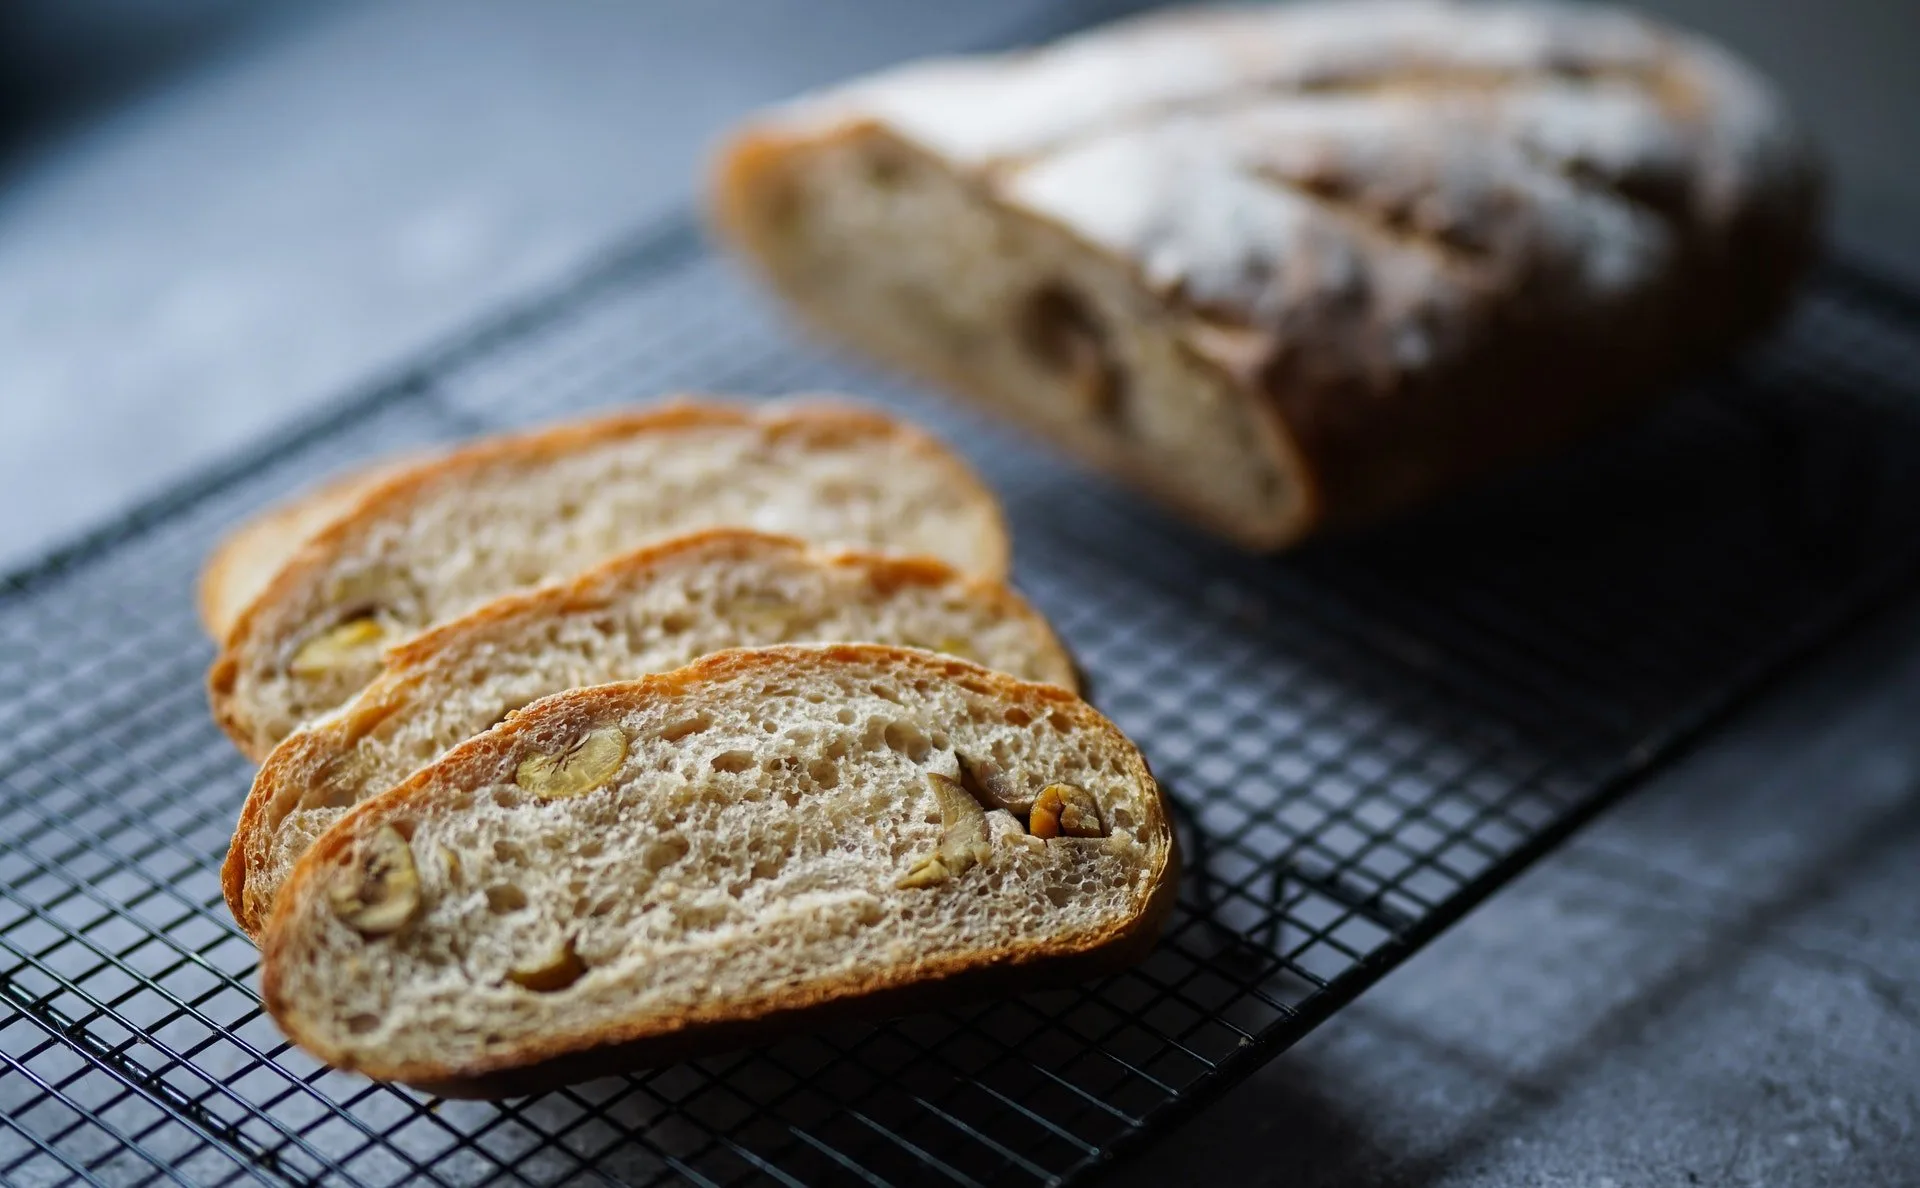 Forget Banana Bread, Here’s Why You Should Bake Sourdough Bread